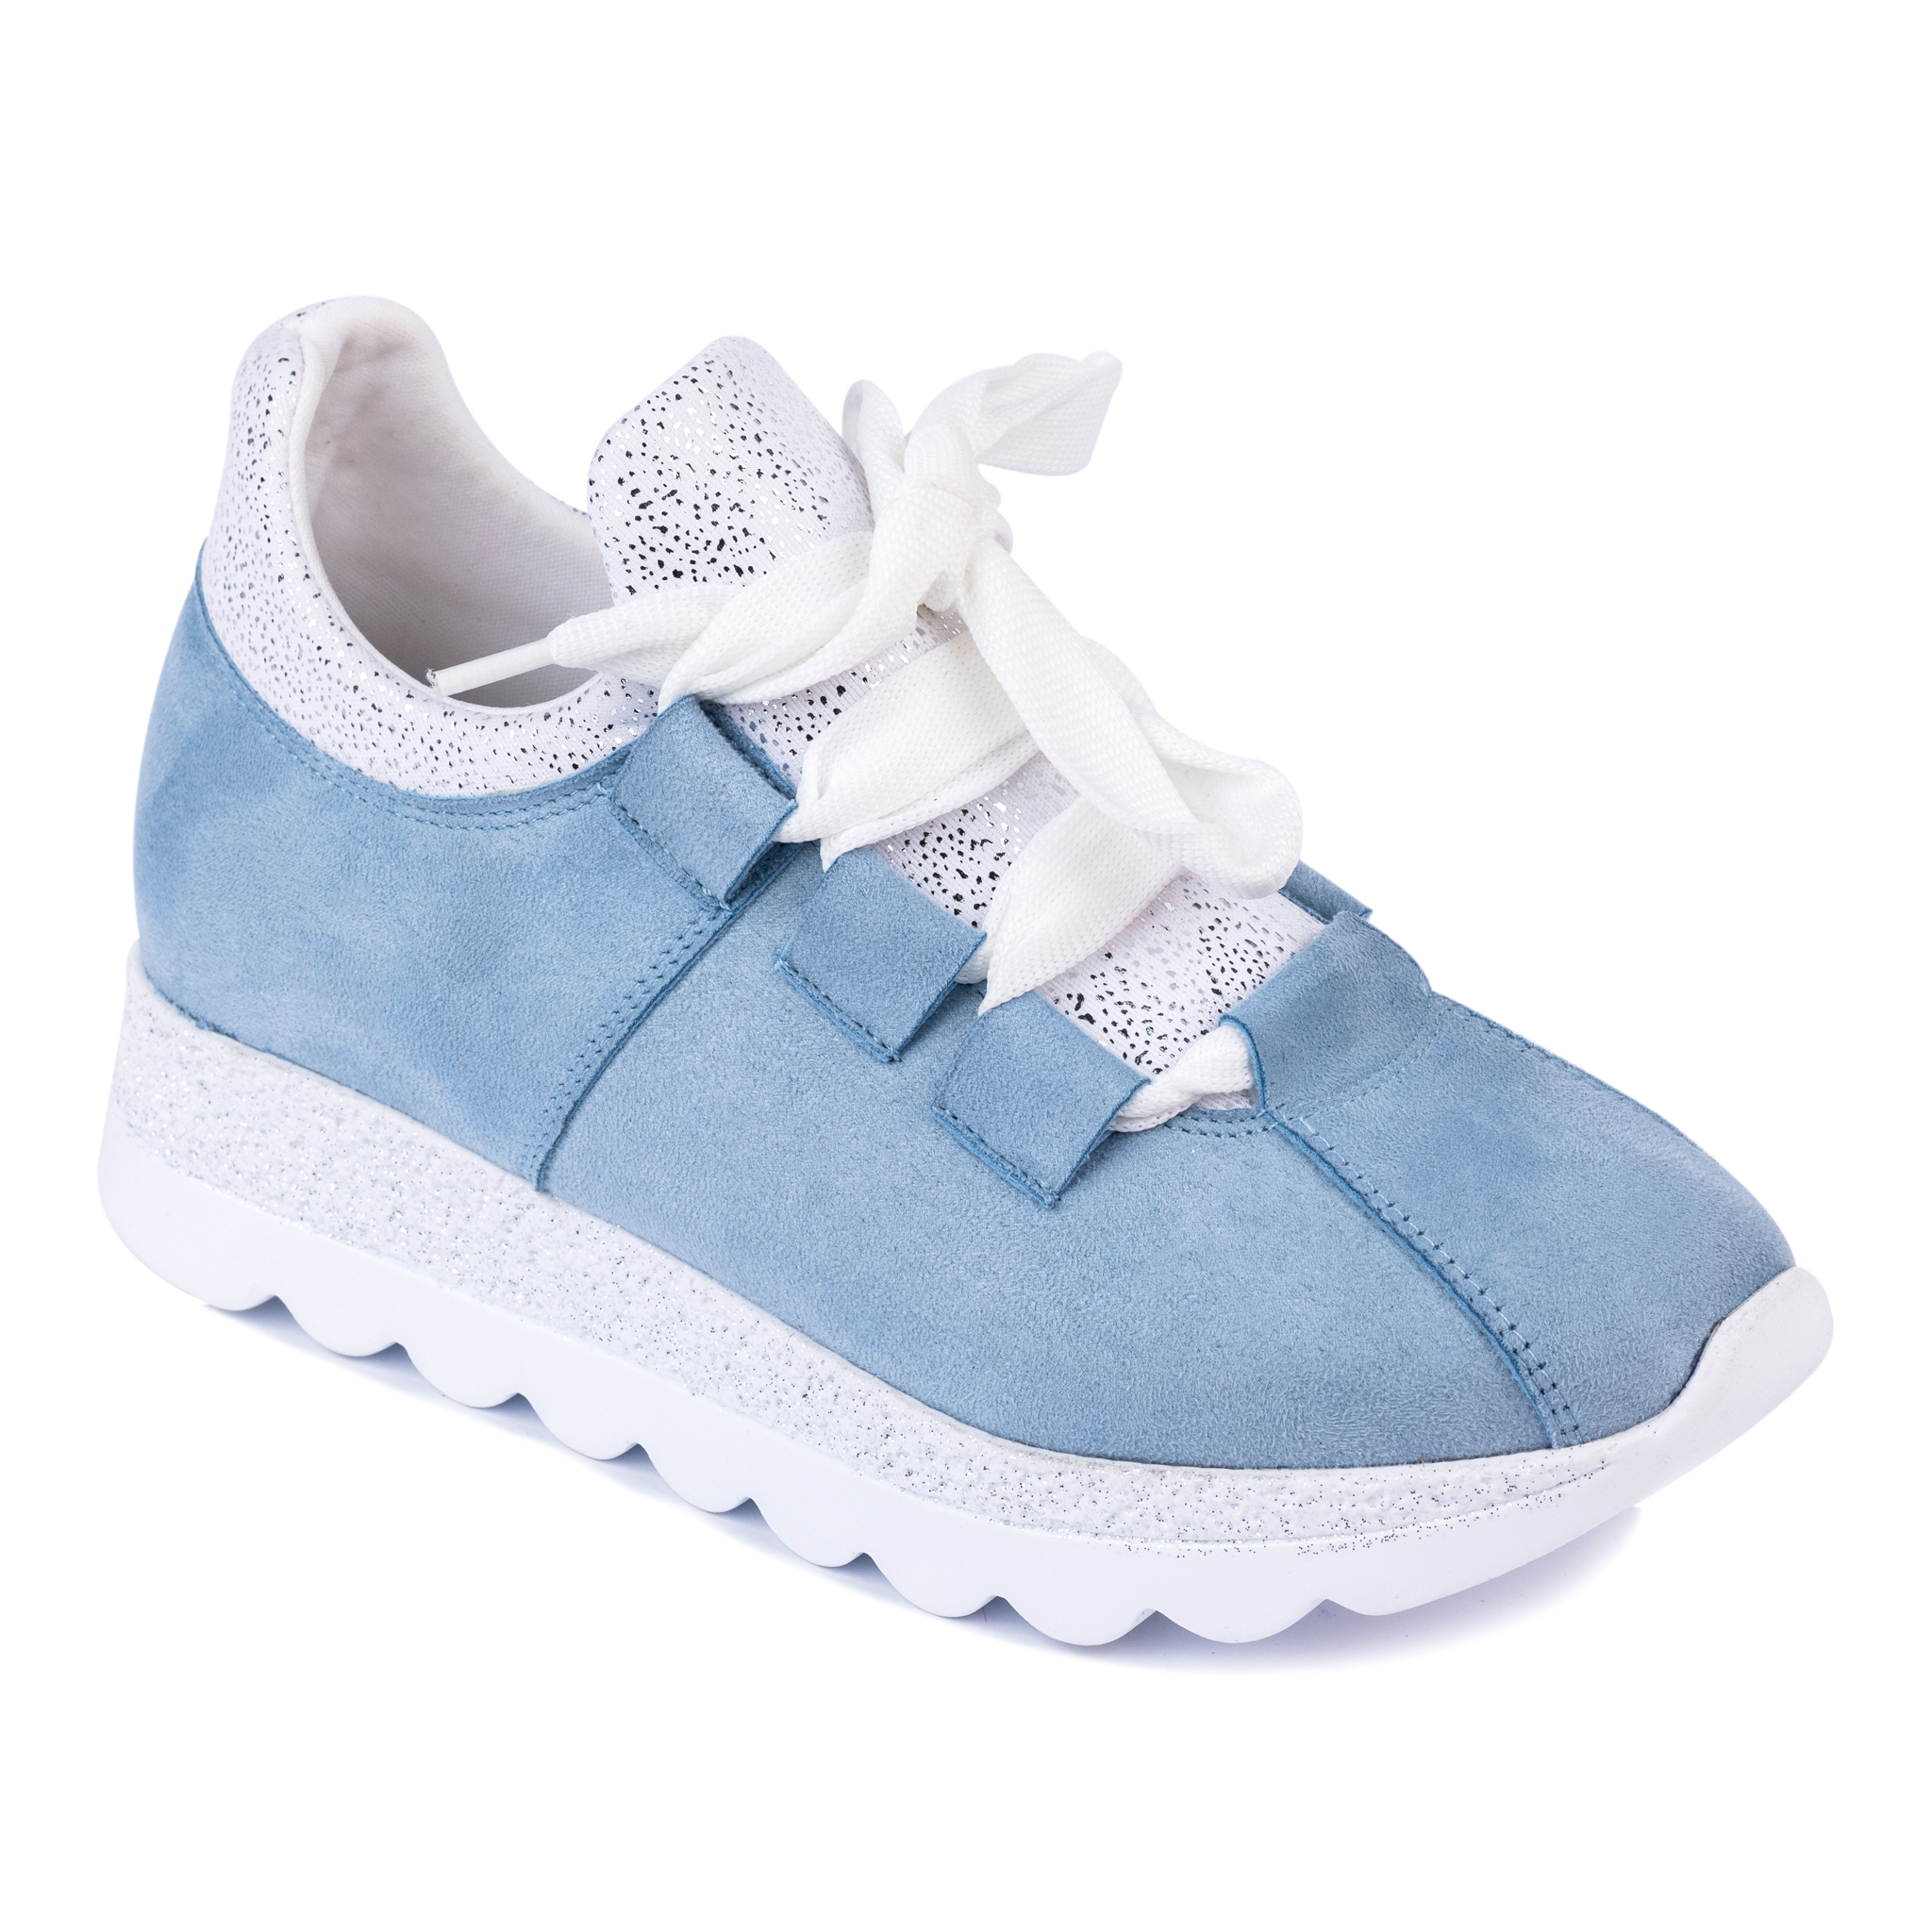 STRASS SNEAKERS - BLUE